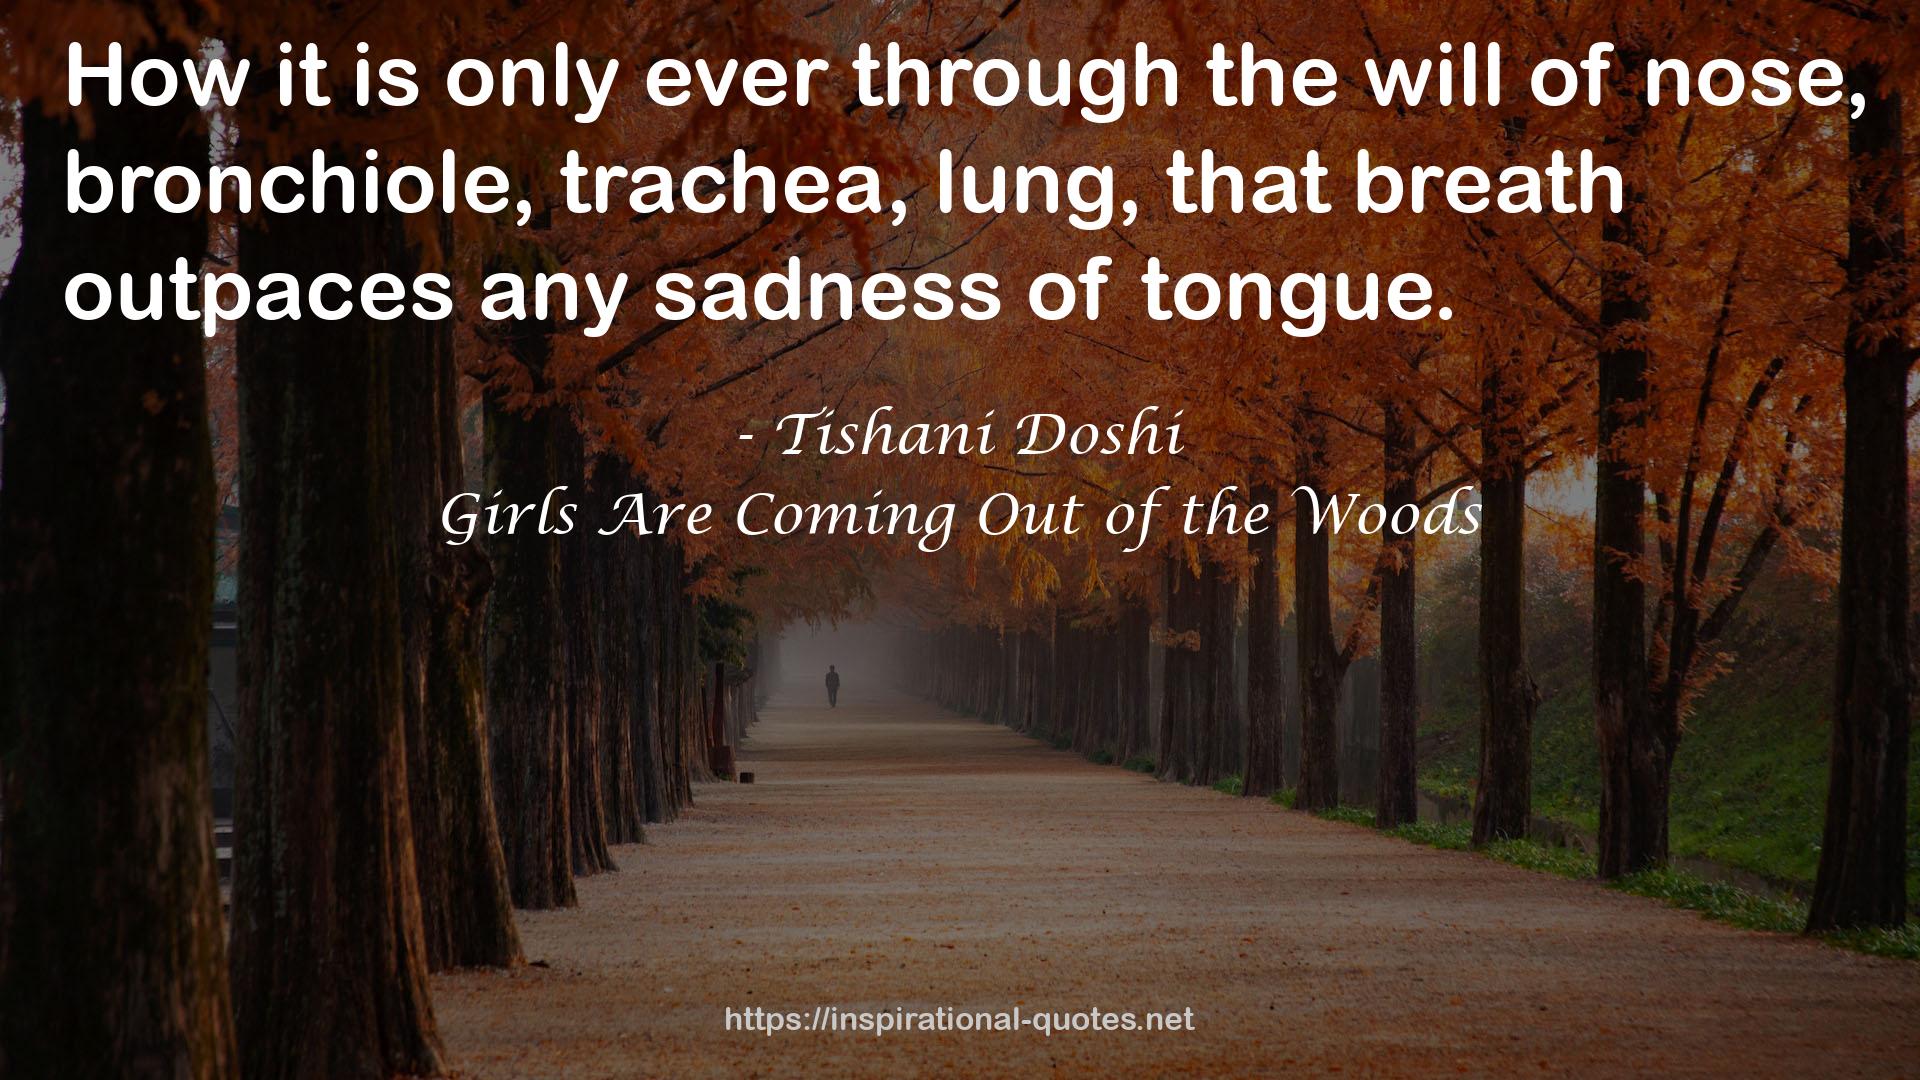 Girls Are Coming Out of the Woods QUOTES